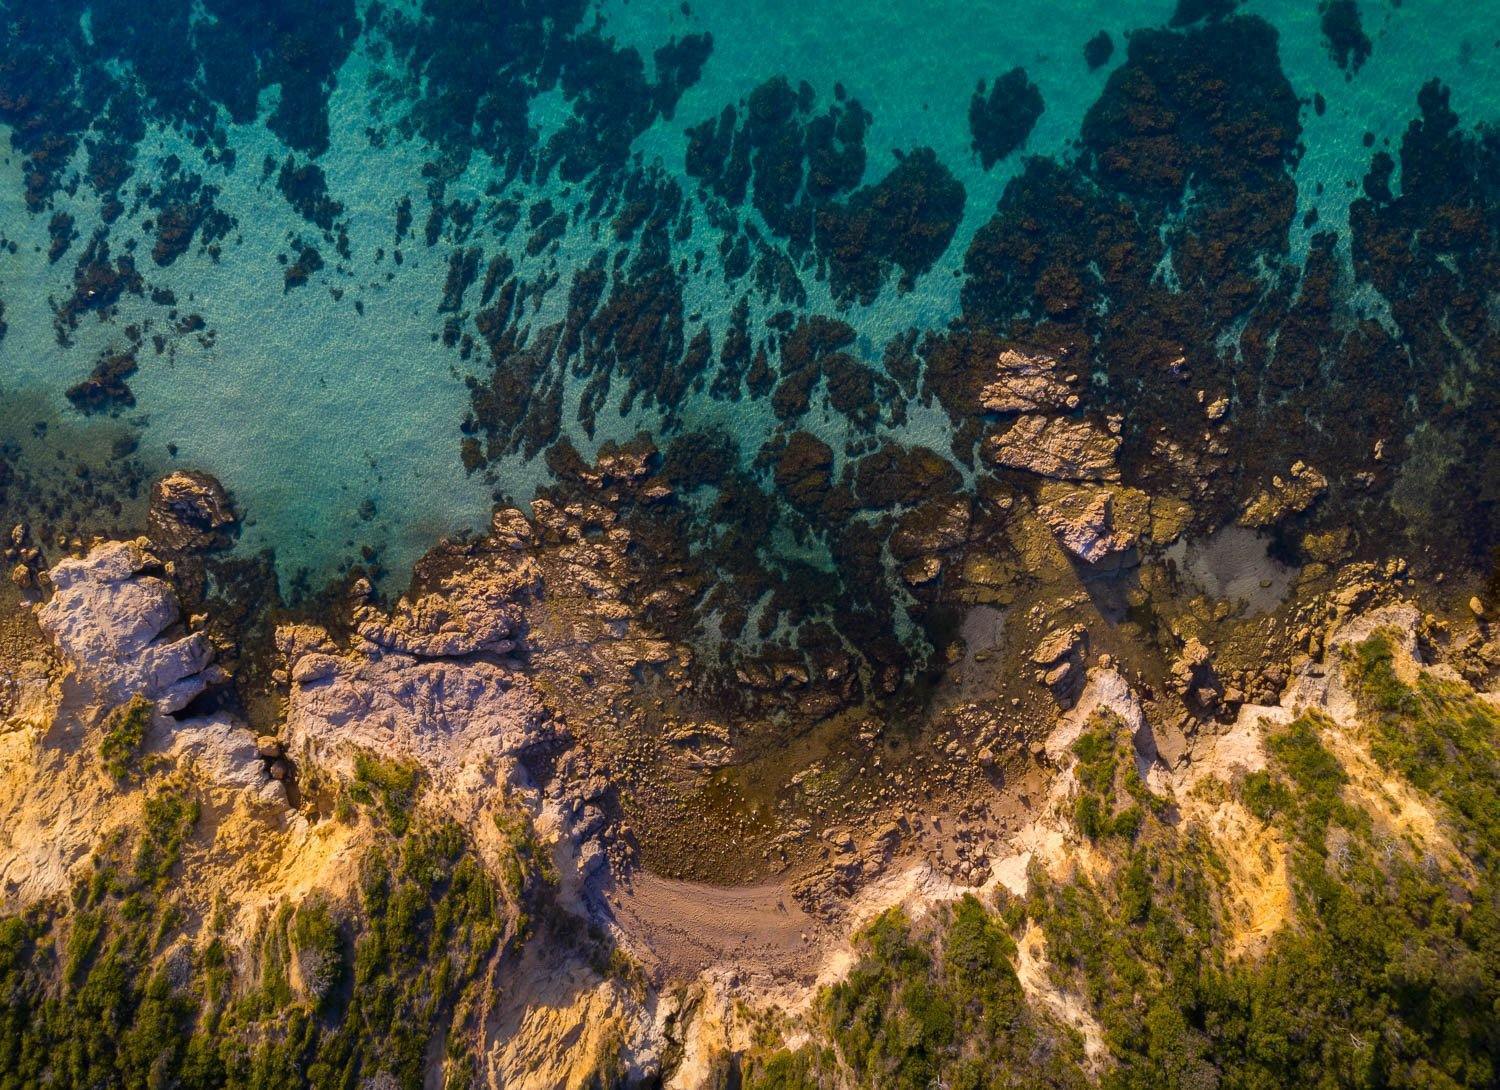 Aerial view of a giant mountain full of greenery, and a sea with greenery underwater below the mountain, Turquoise Waters, Mt Martha - Mornington Peninsula VIC